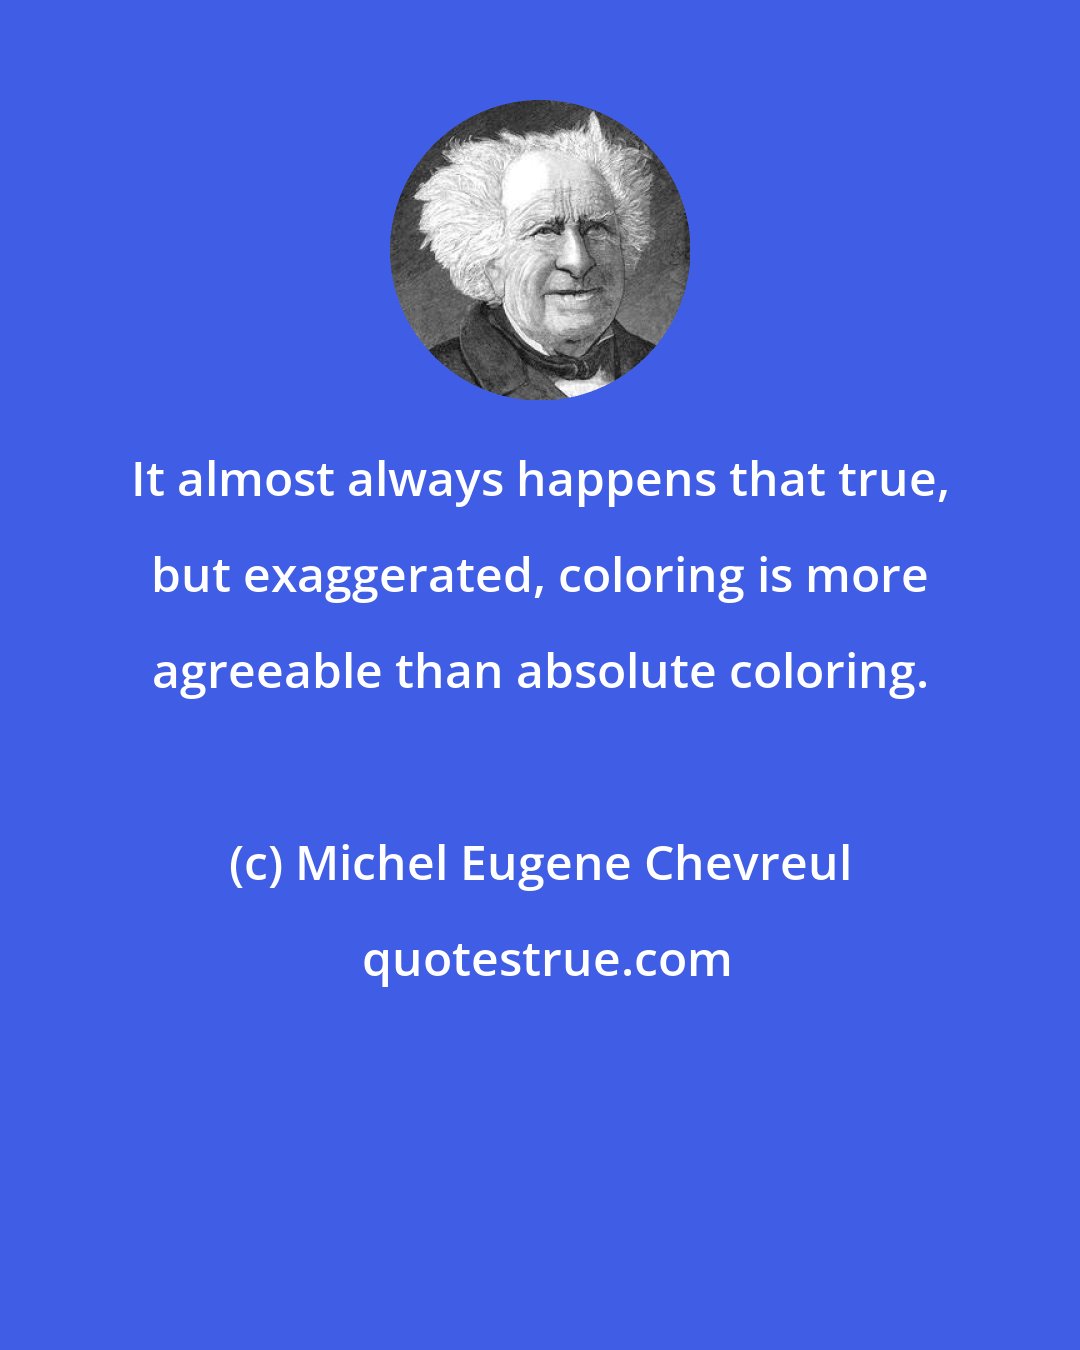 Michel Eugene Chevreul: It almost always happens that true, but exaggerated, coloring is more agreeable than absolute coloring.